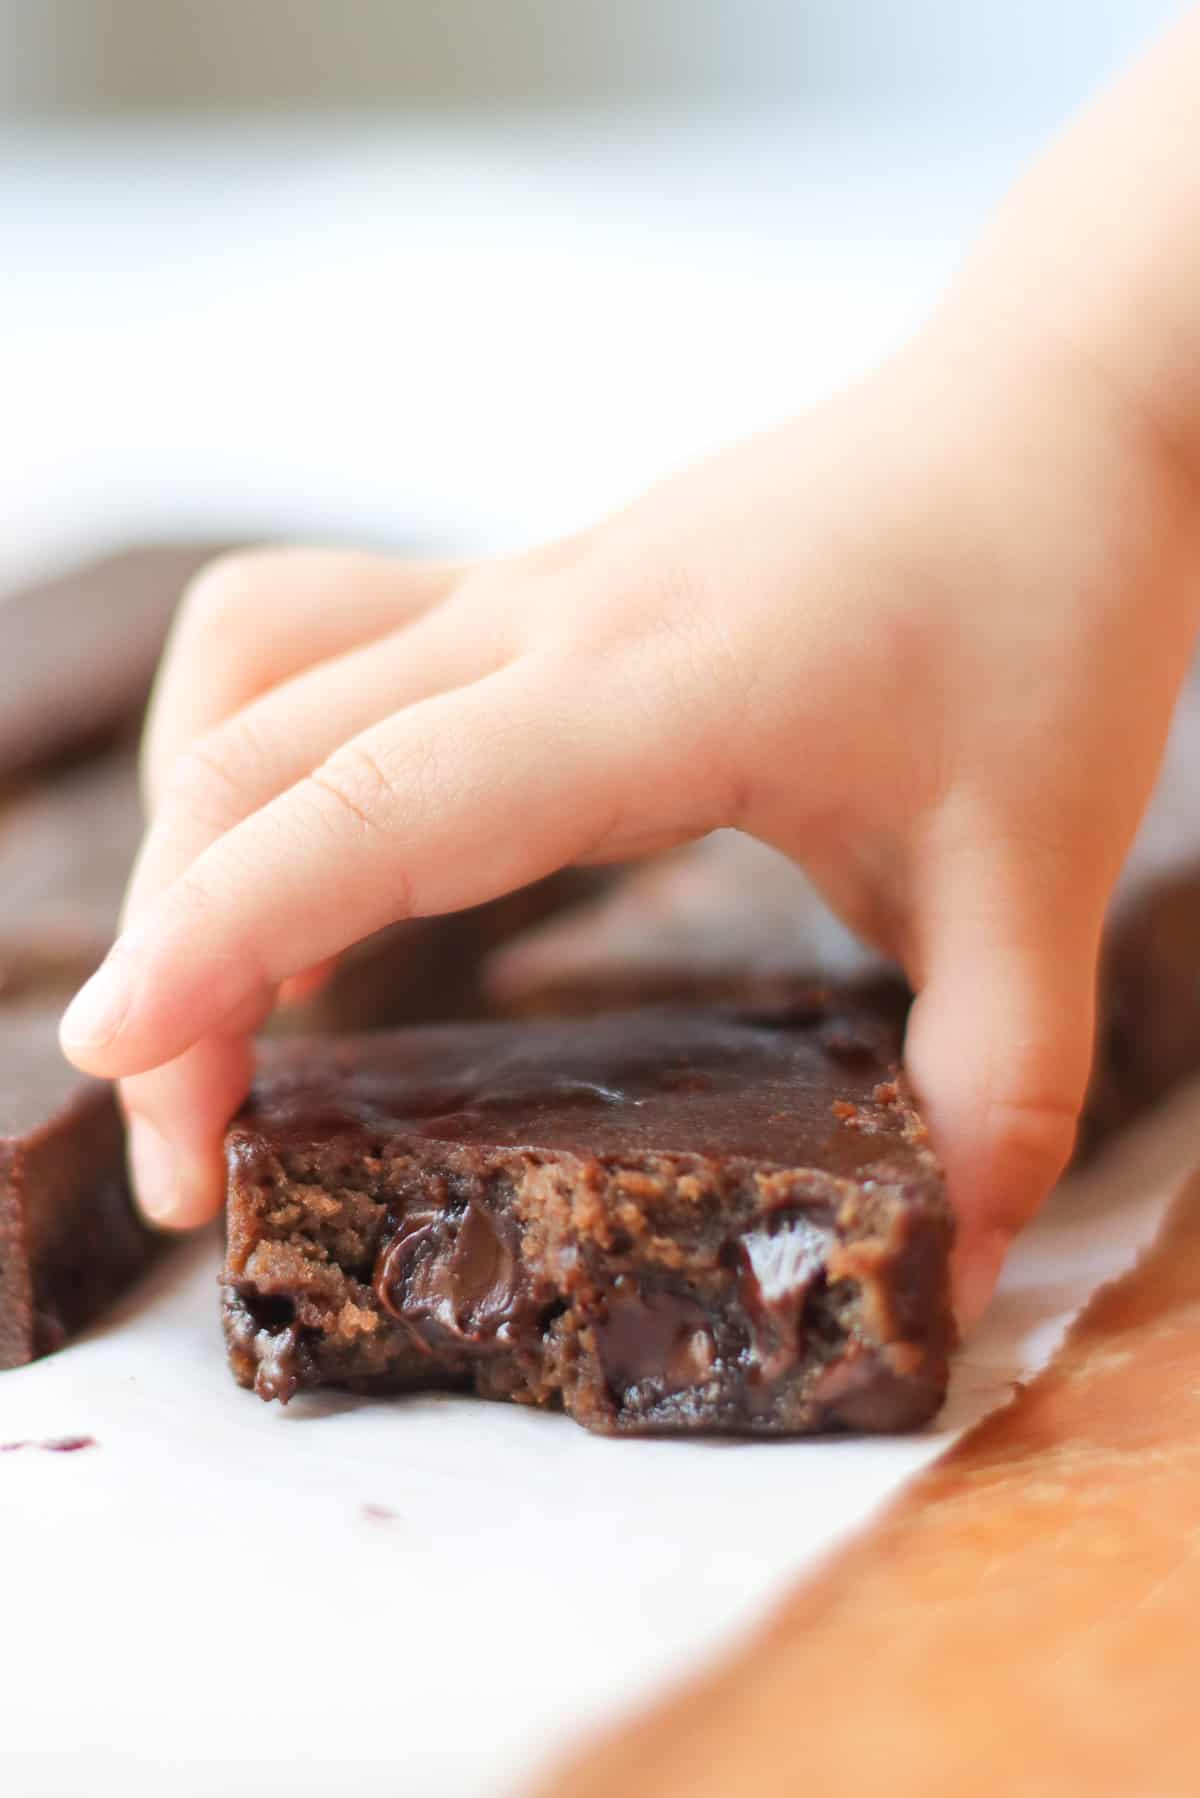 A close up shot of a brownie with a bite taken and toddler holding it.